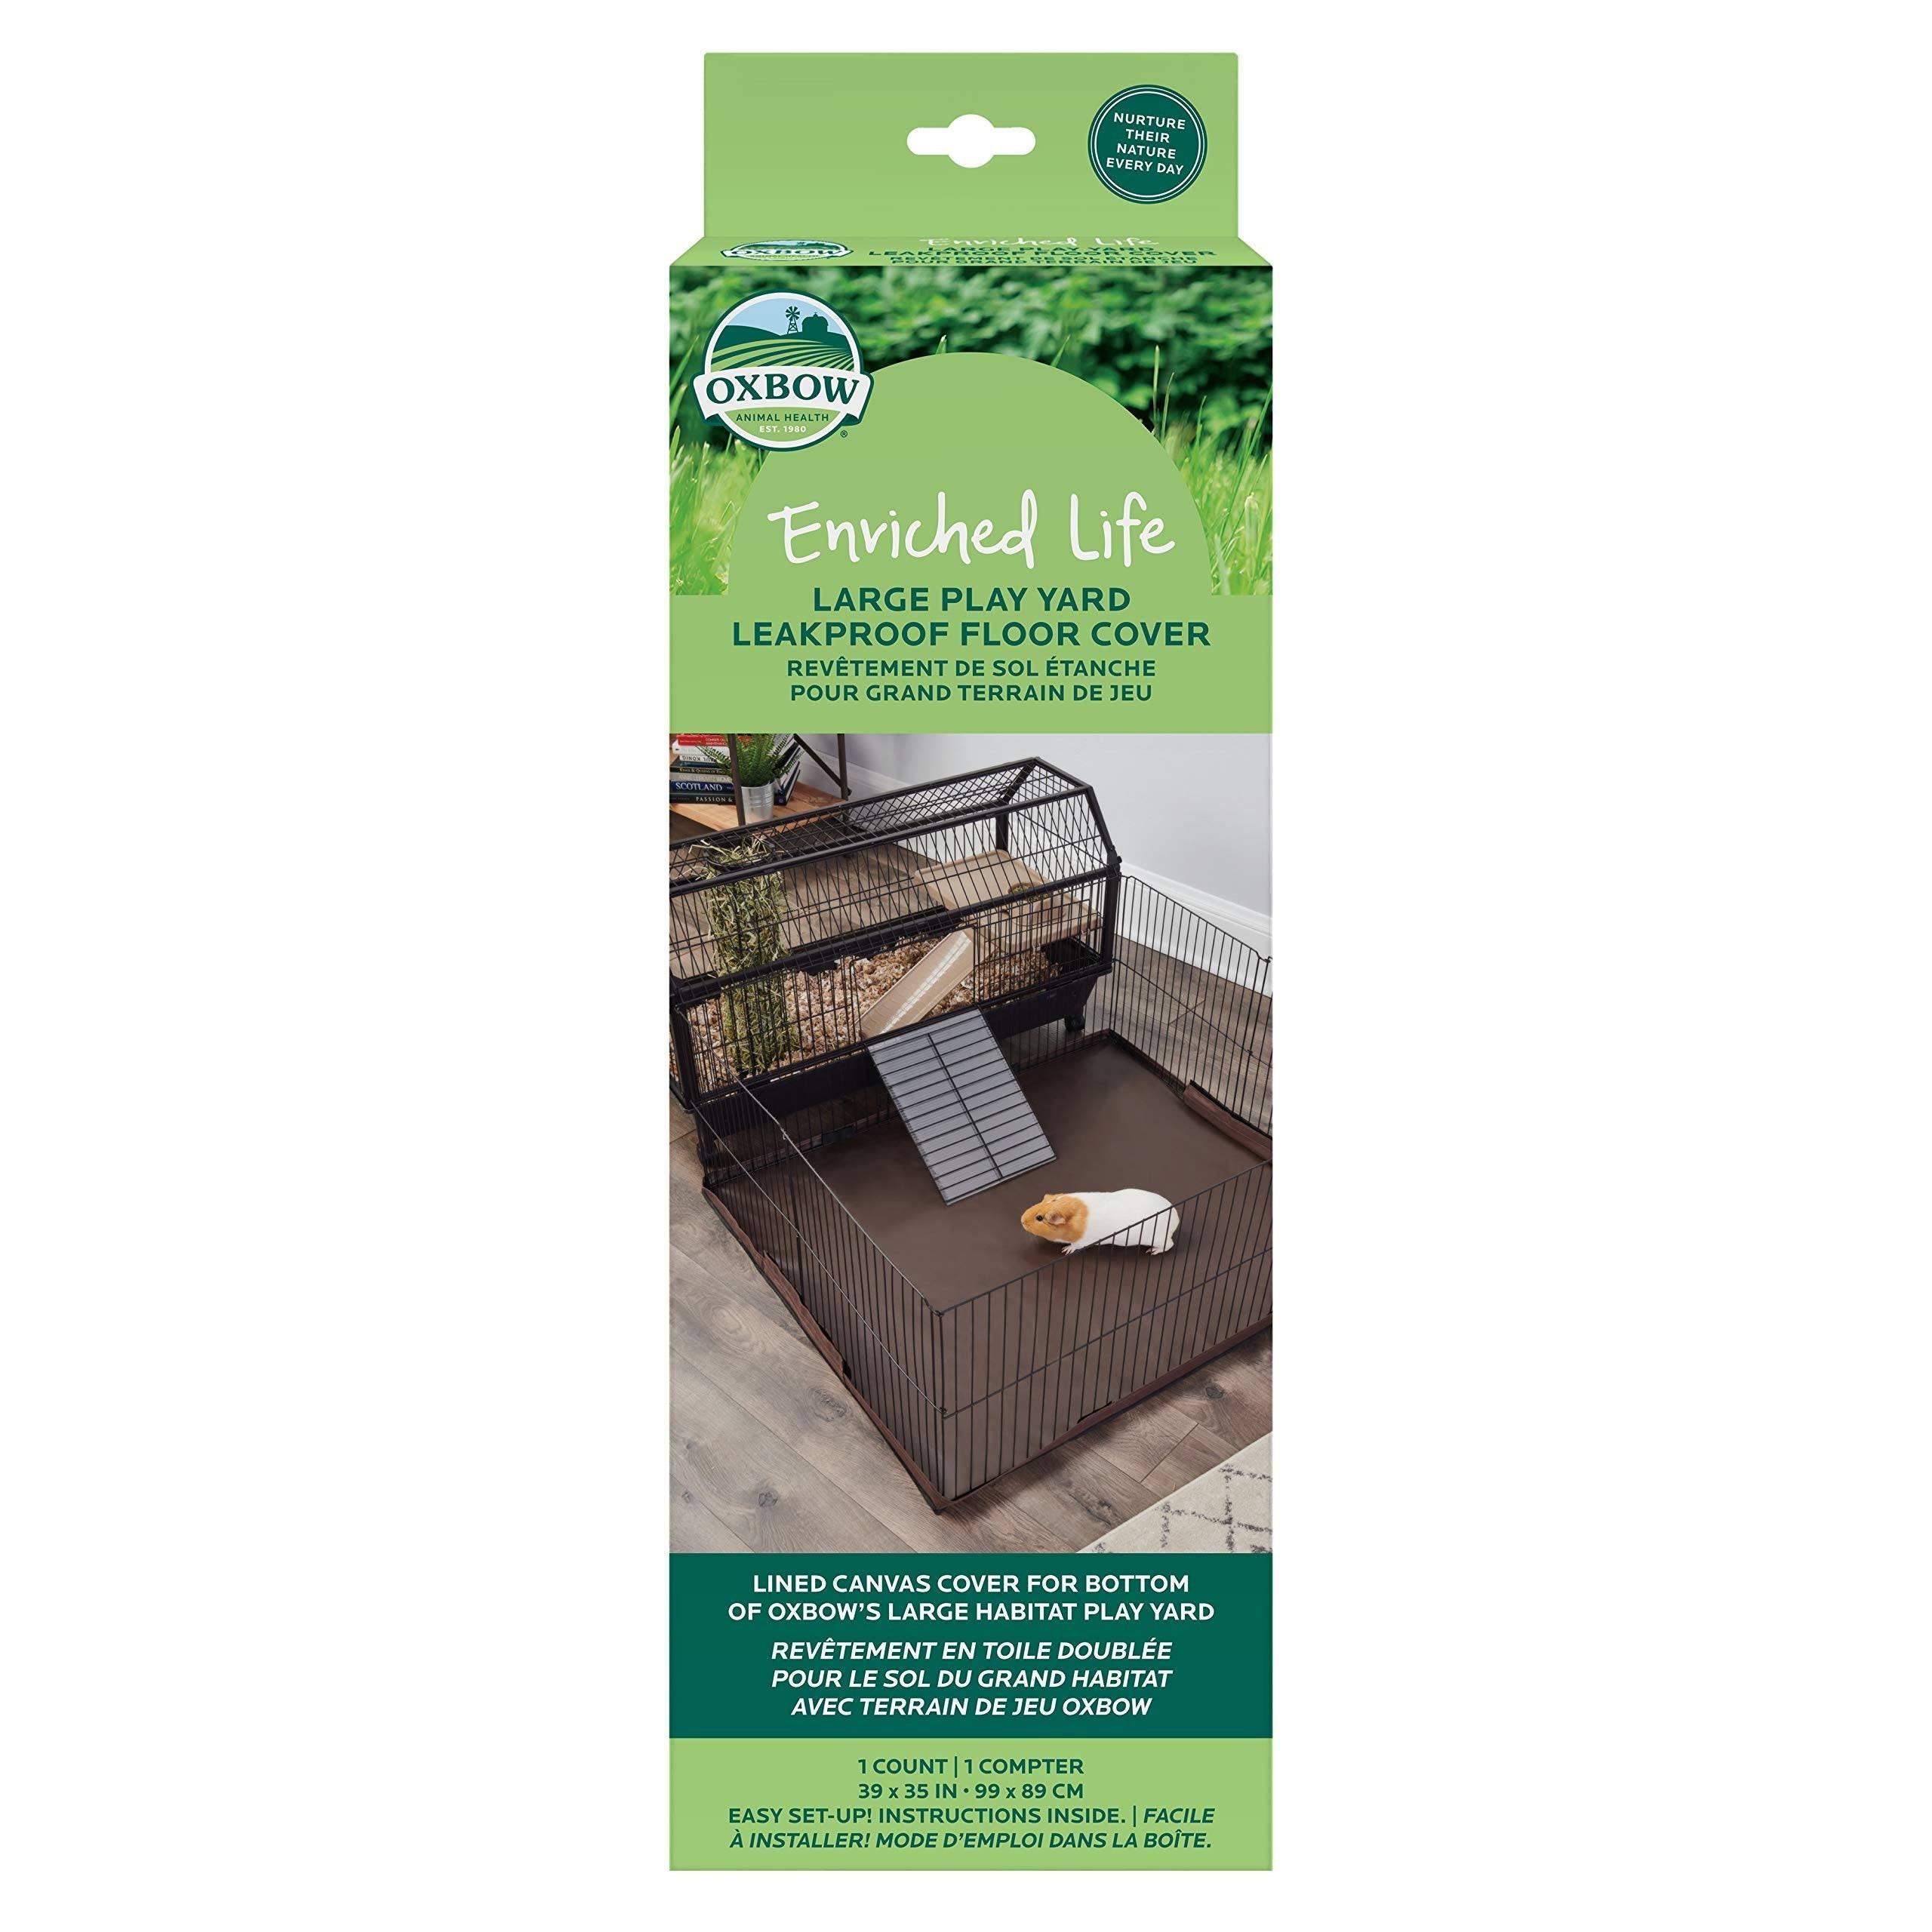 Oxbow Enriched Life Leakproof Play Yard Floor Cover, Large